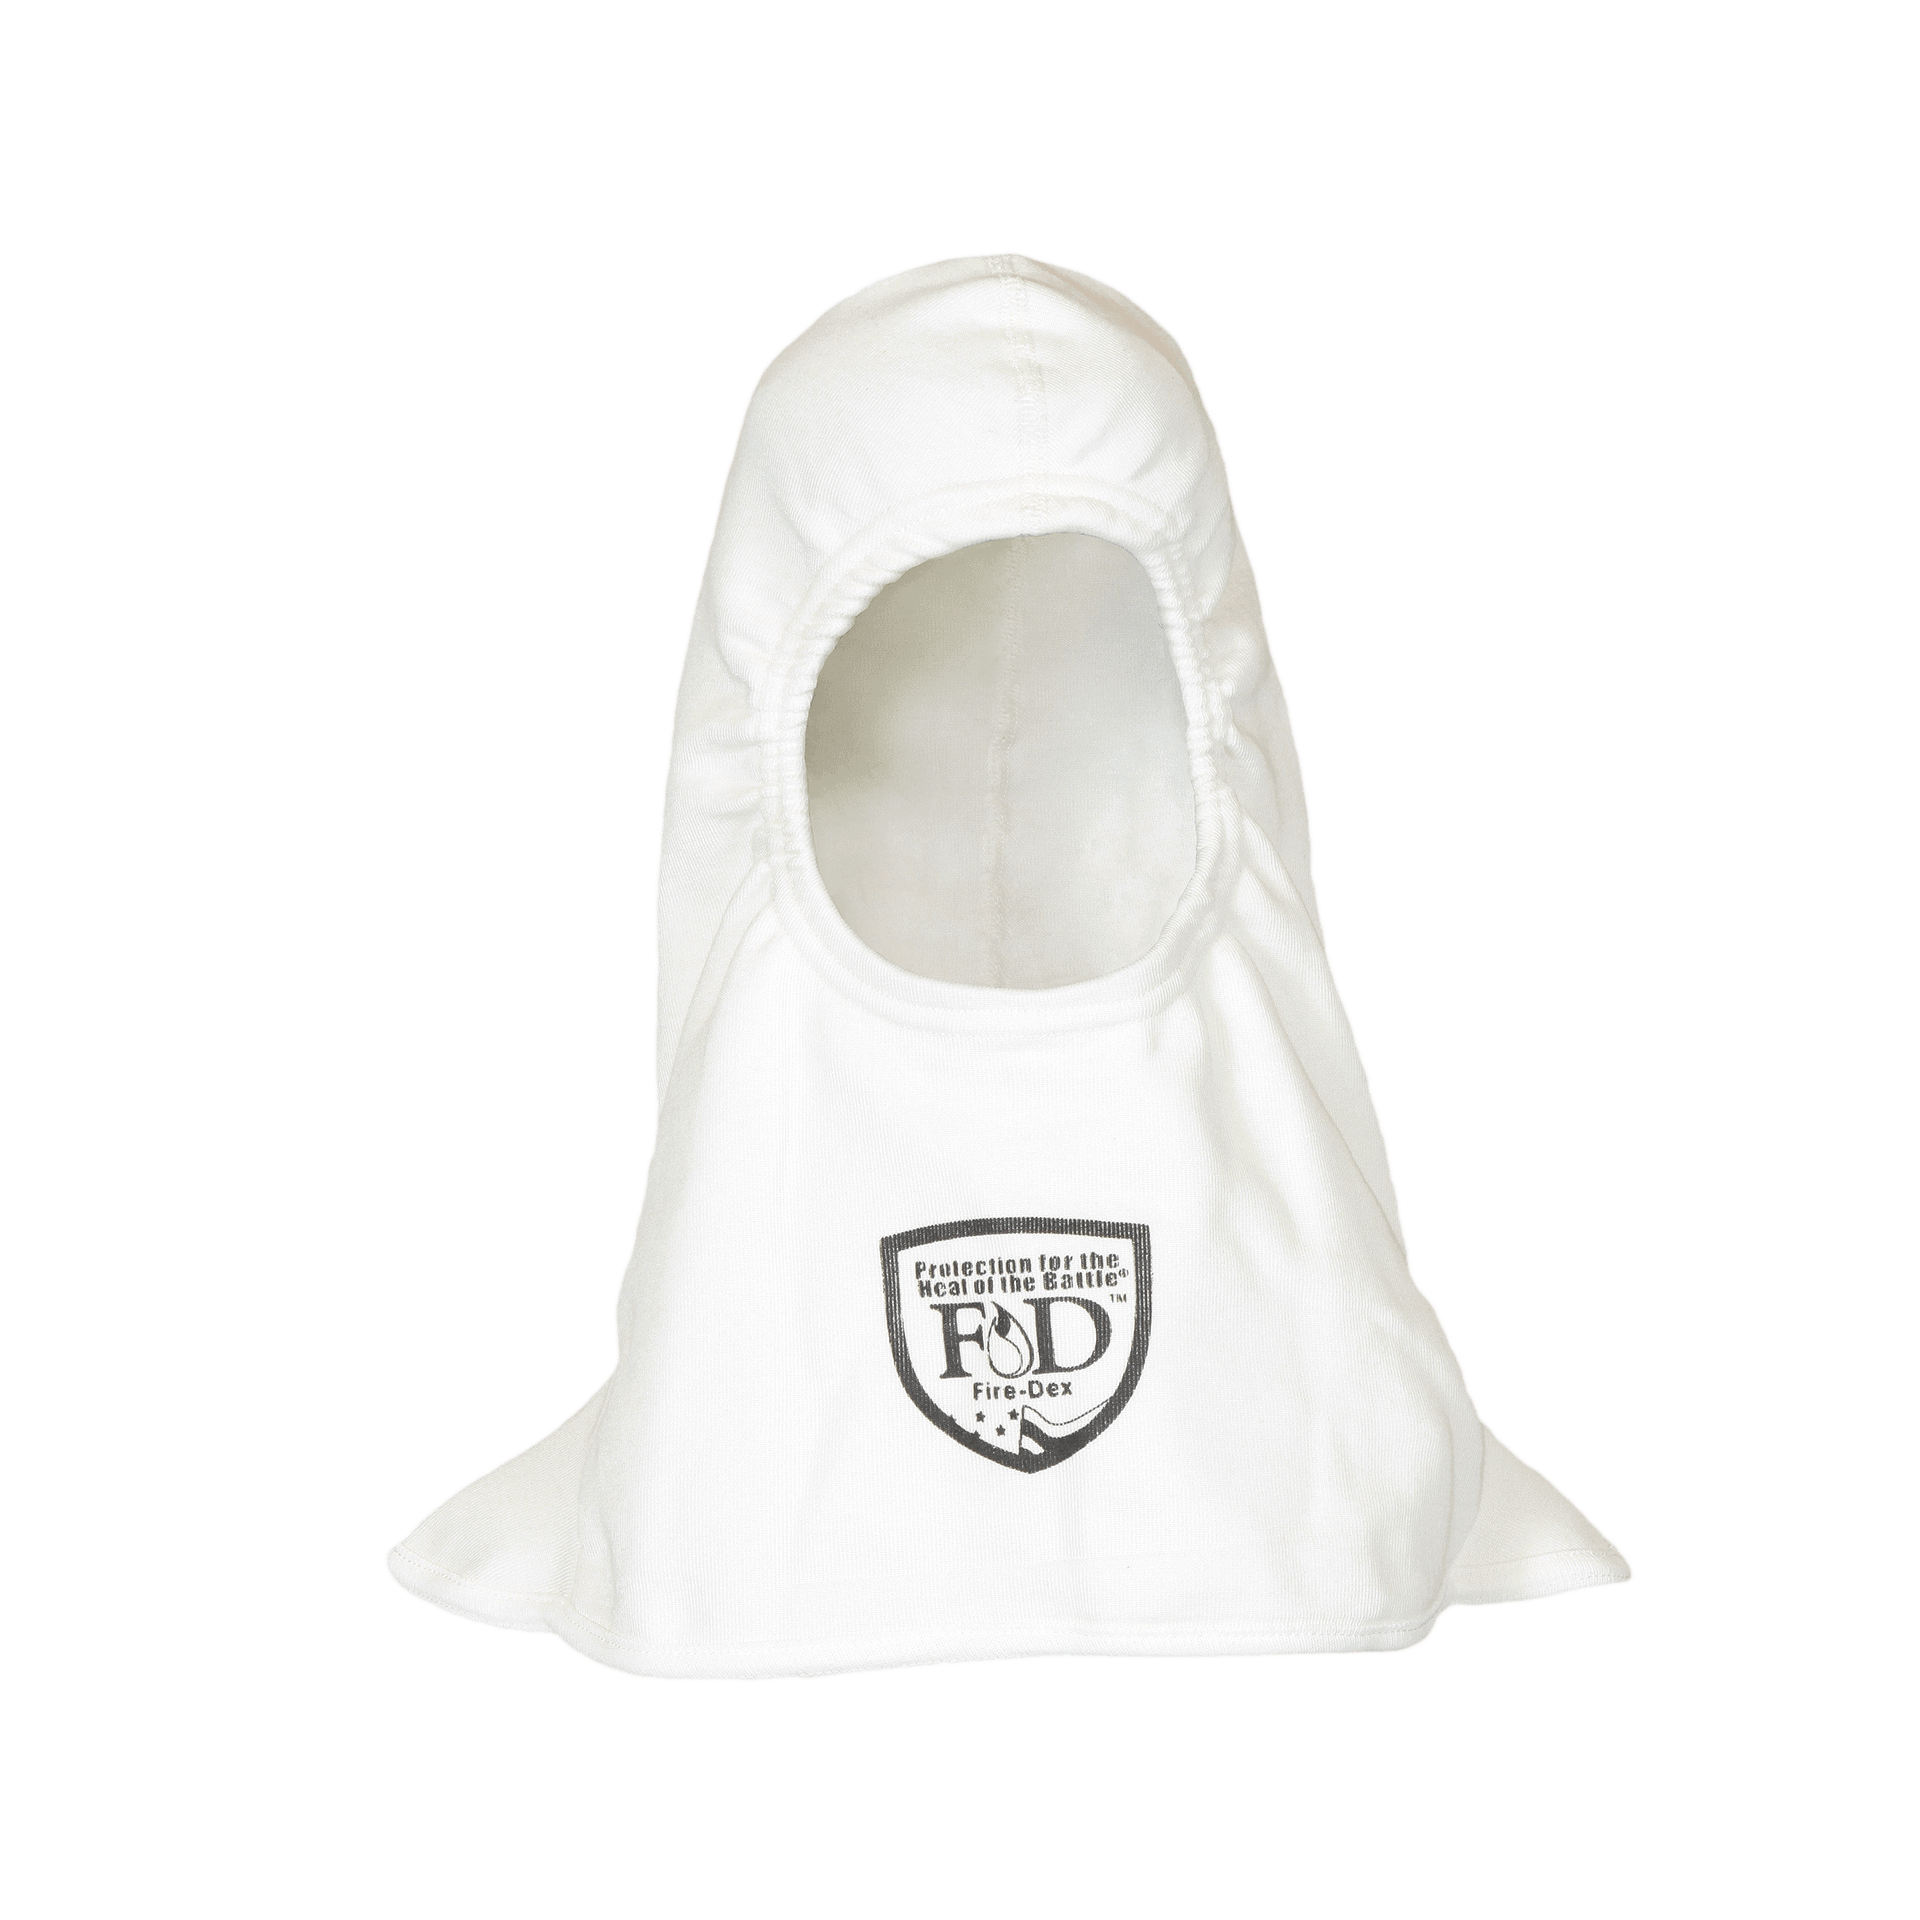 Fire-Dex H71 Classic Fire Hood | The Fire Center | Fuego Fire Center | Store | FIREFIGHTER GEAR | FREE SHIPPING | The H71 model is a 2-layer seamless bib with shoulder gusset. Certified to NFPA 1971.